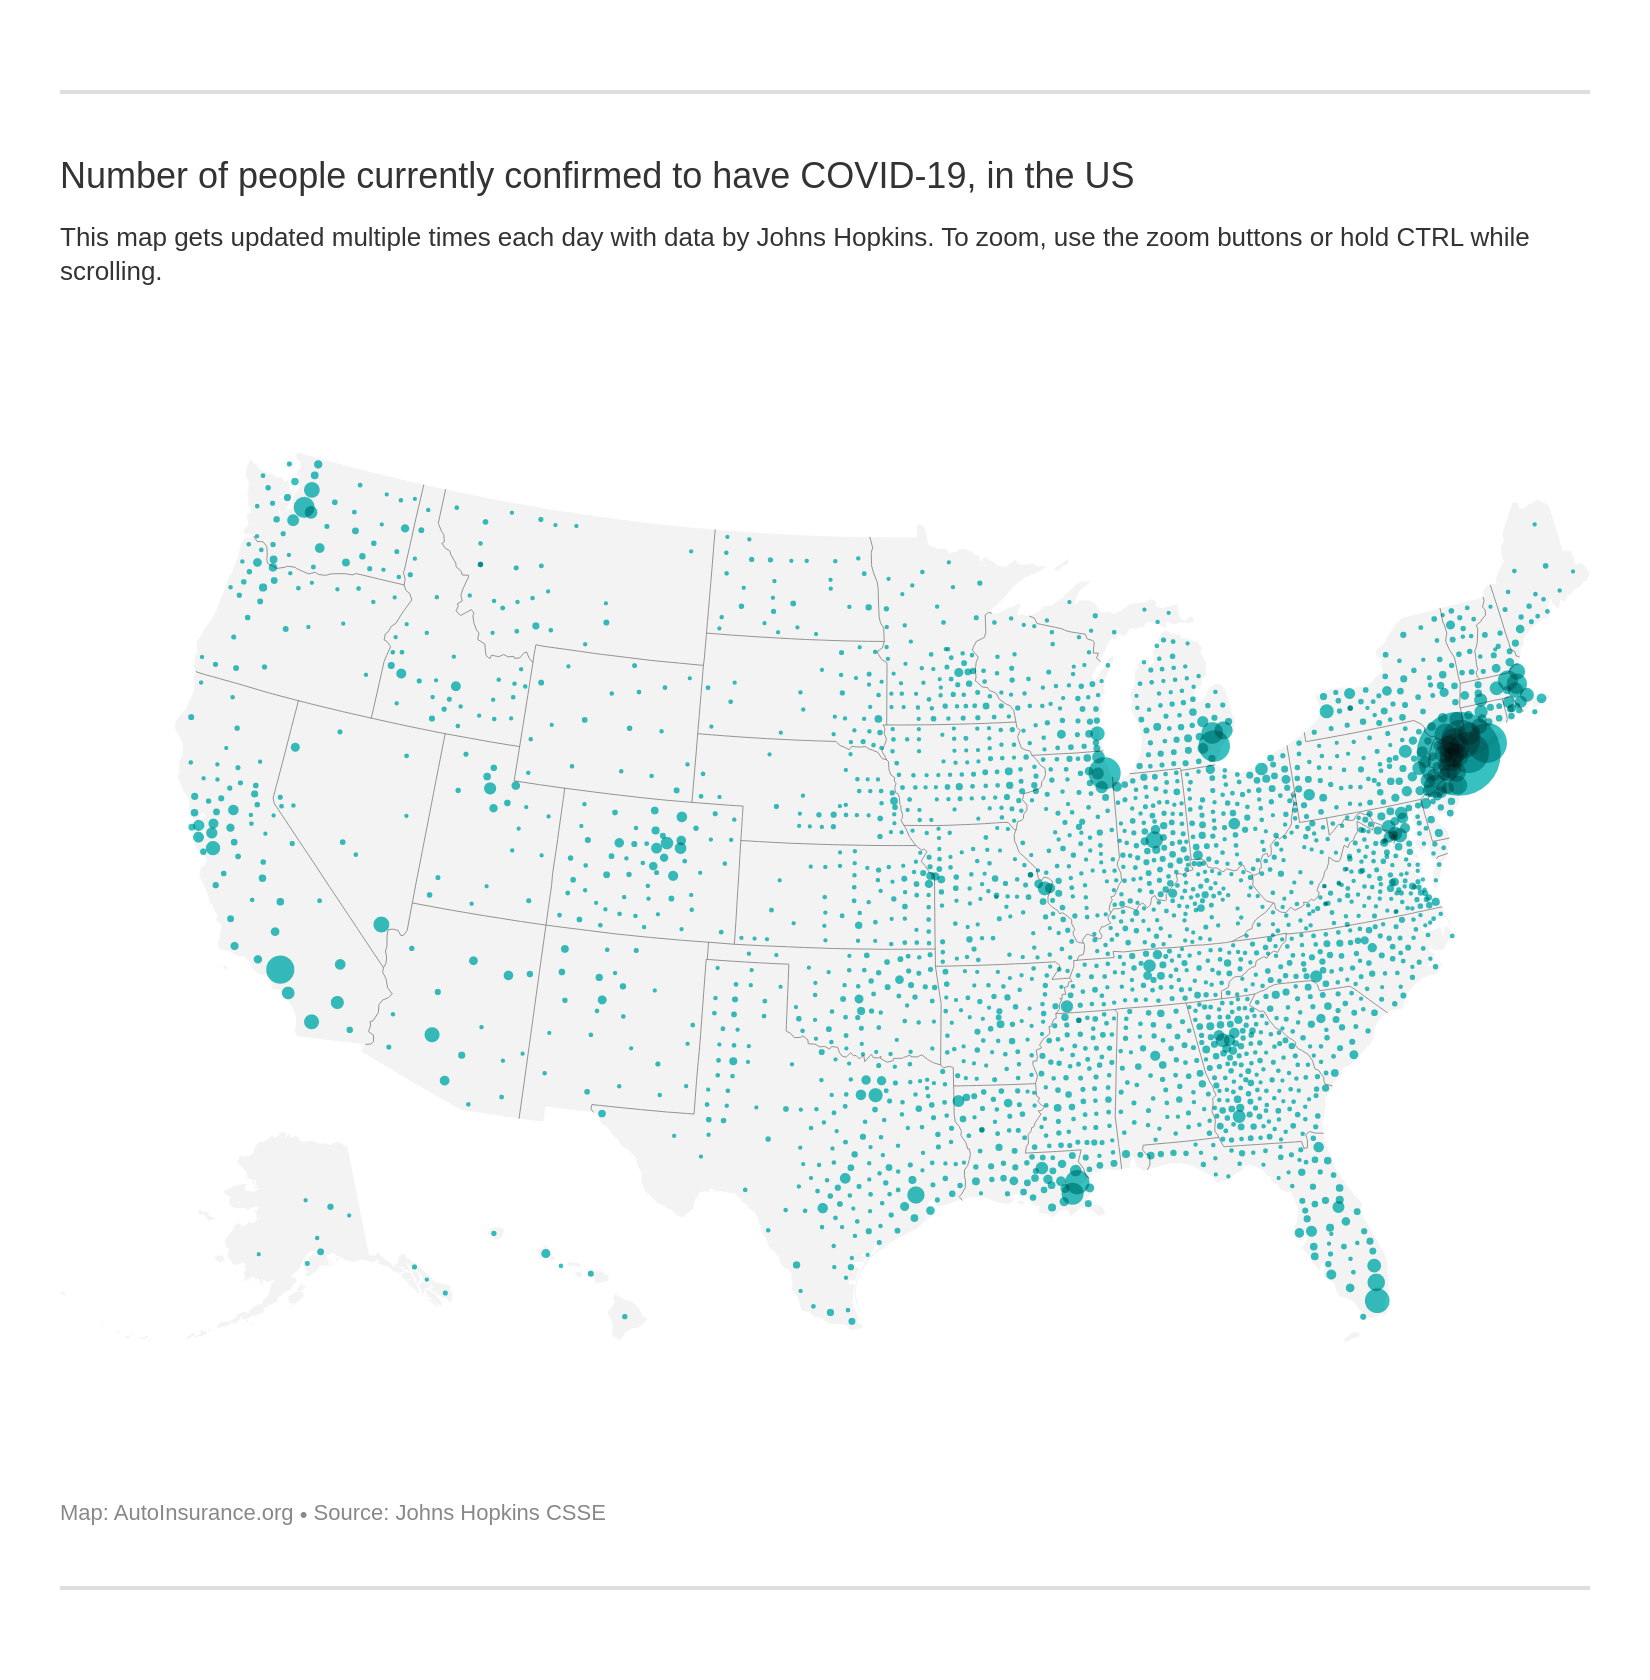 Number of people currently confirmed to have COVID-19, in the US